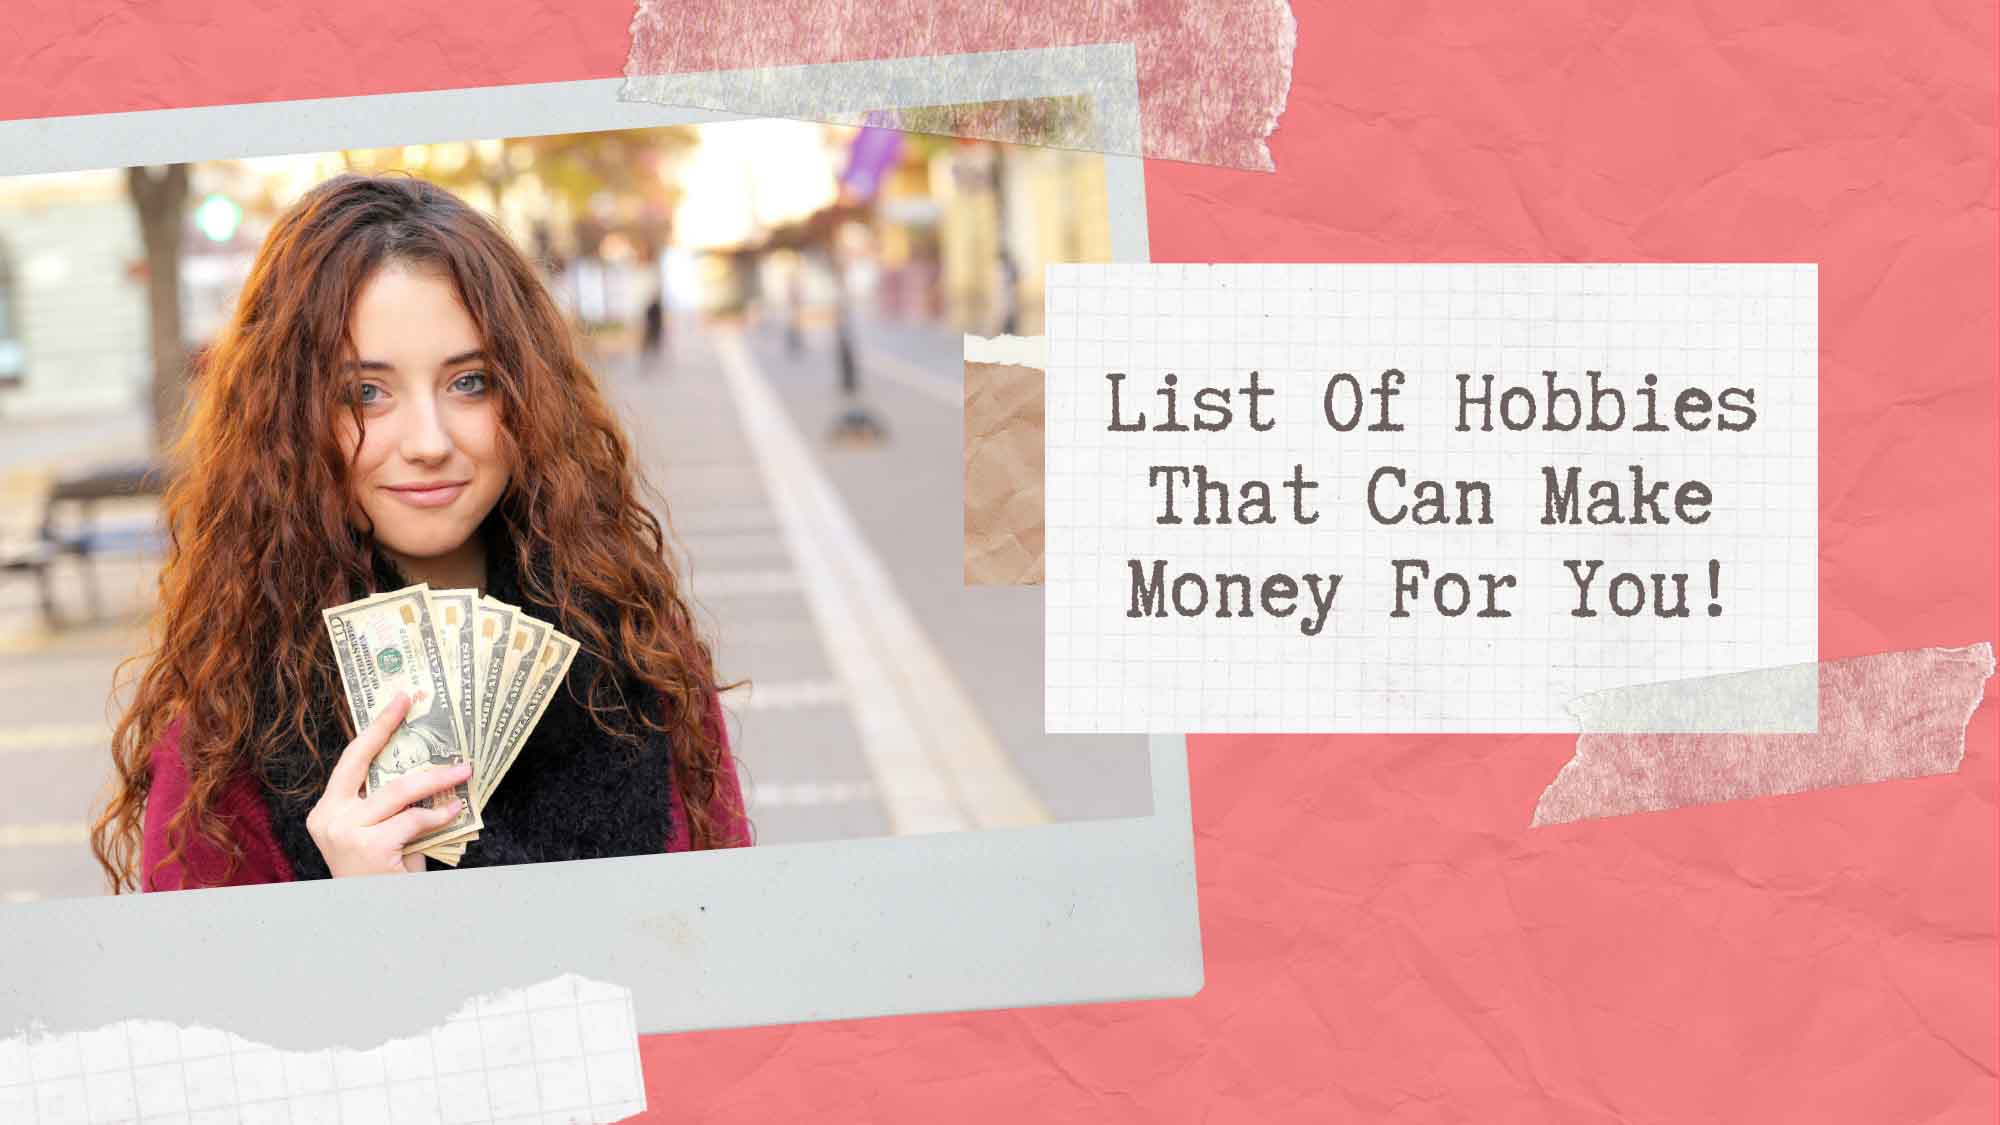 List Of Hobbies That Can Make Money For You!